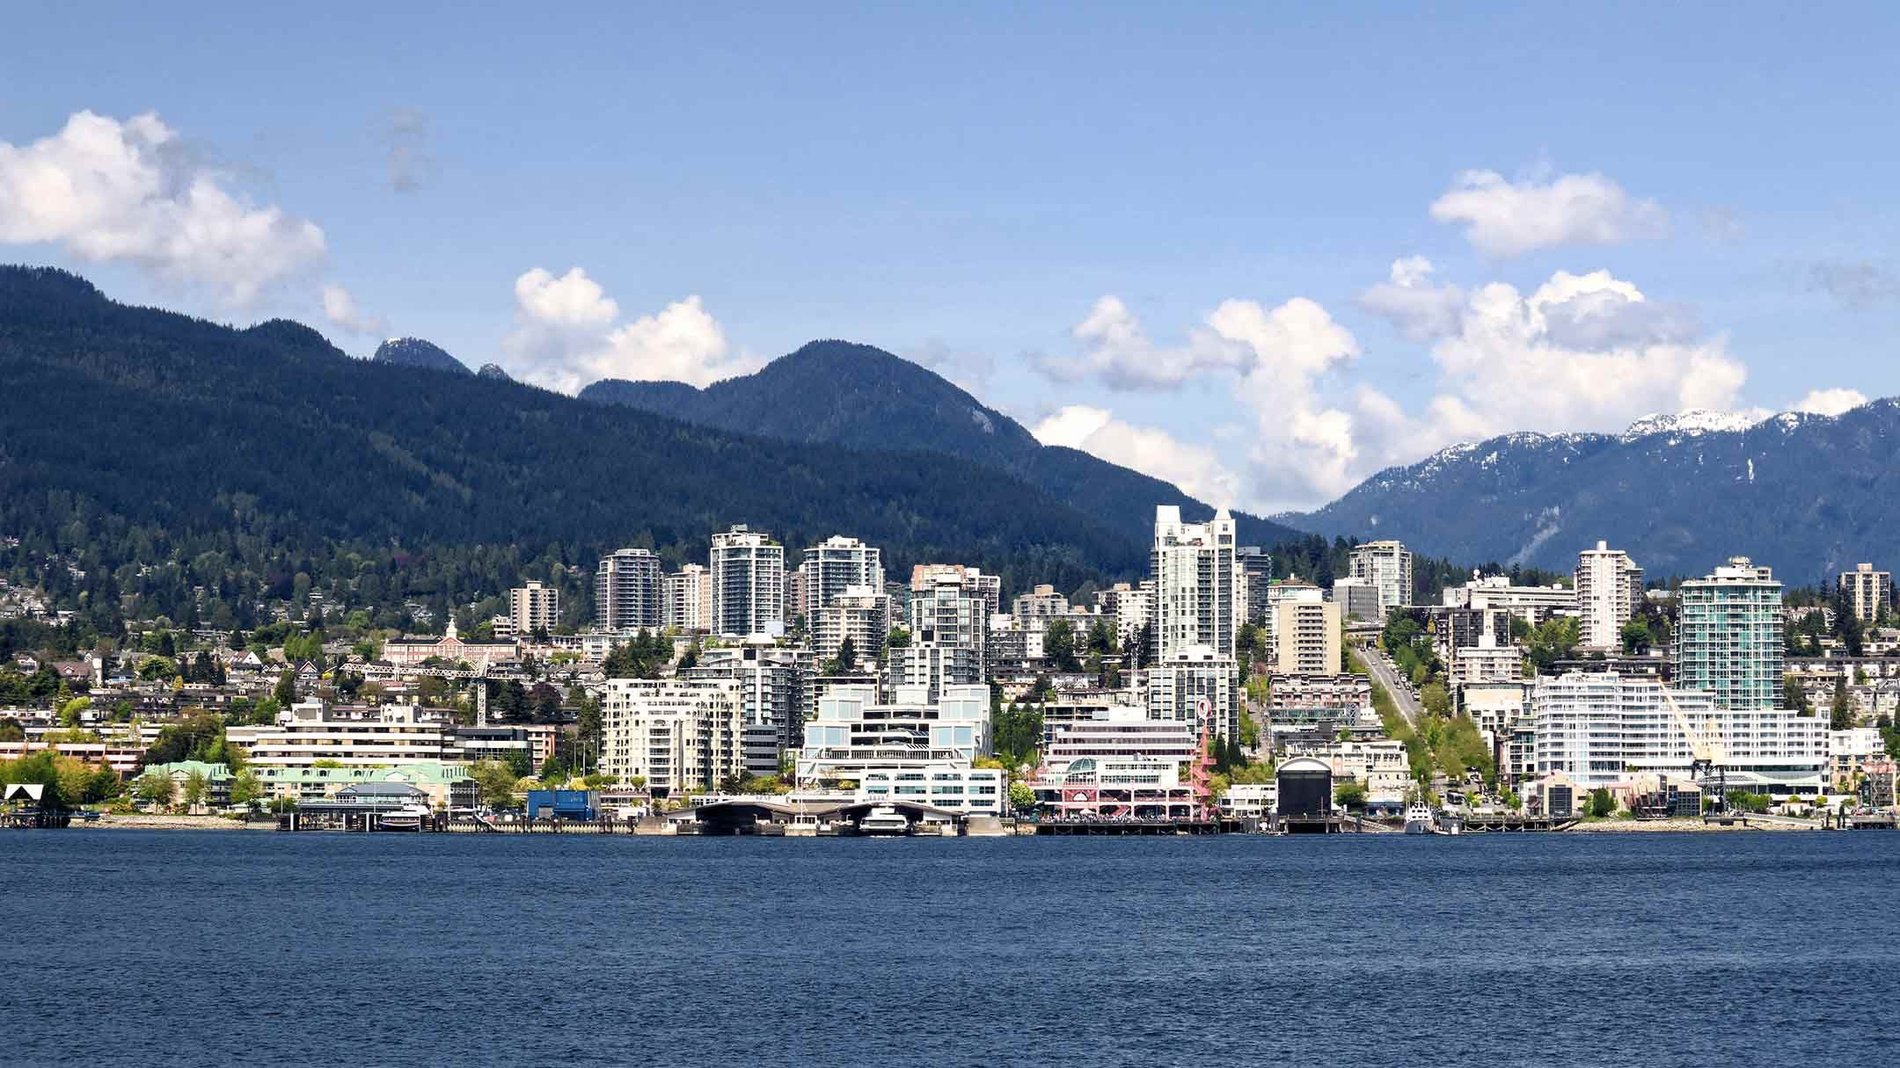 North Vancouver shore and skyline on Lonsdale Quay with highrise residential and commercial buildings